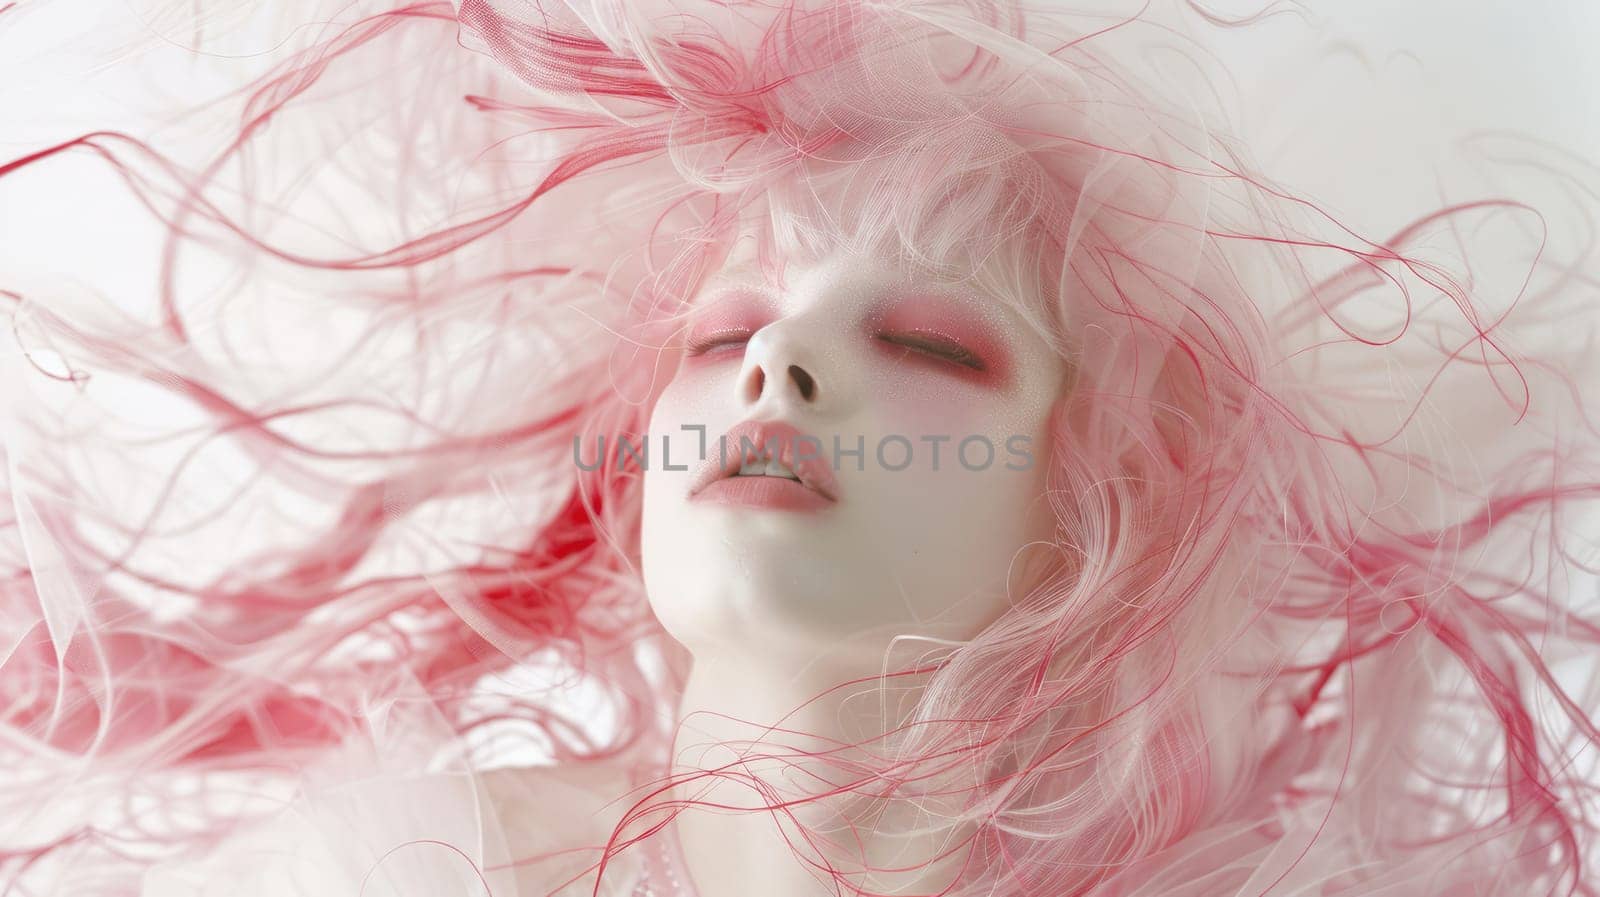 Professional make-up for a magical fantasy style. Makeup for filming or cosplay parties AI